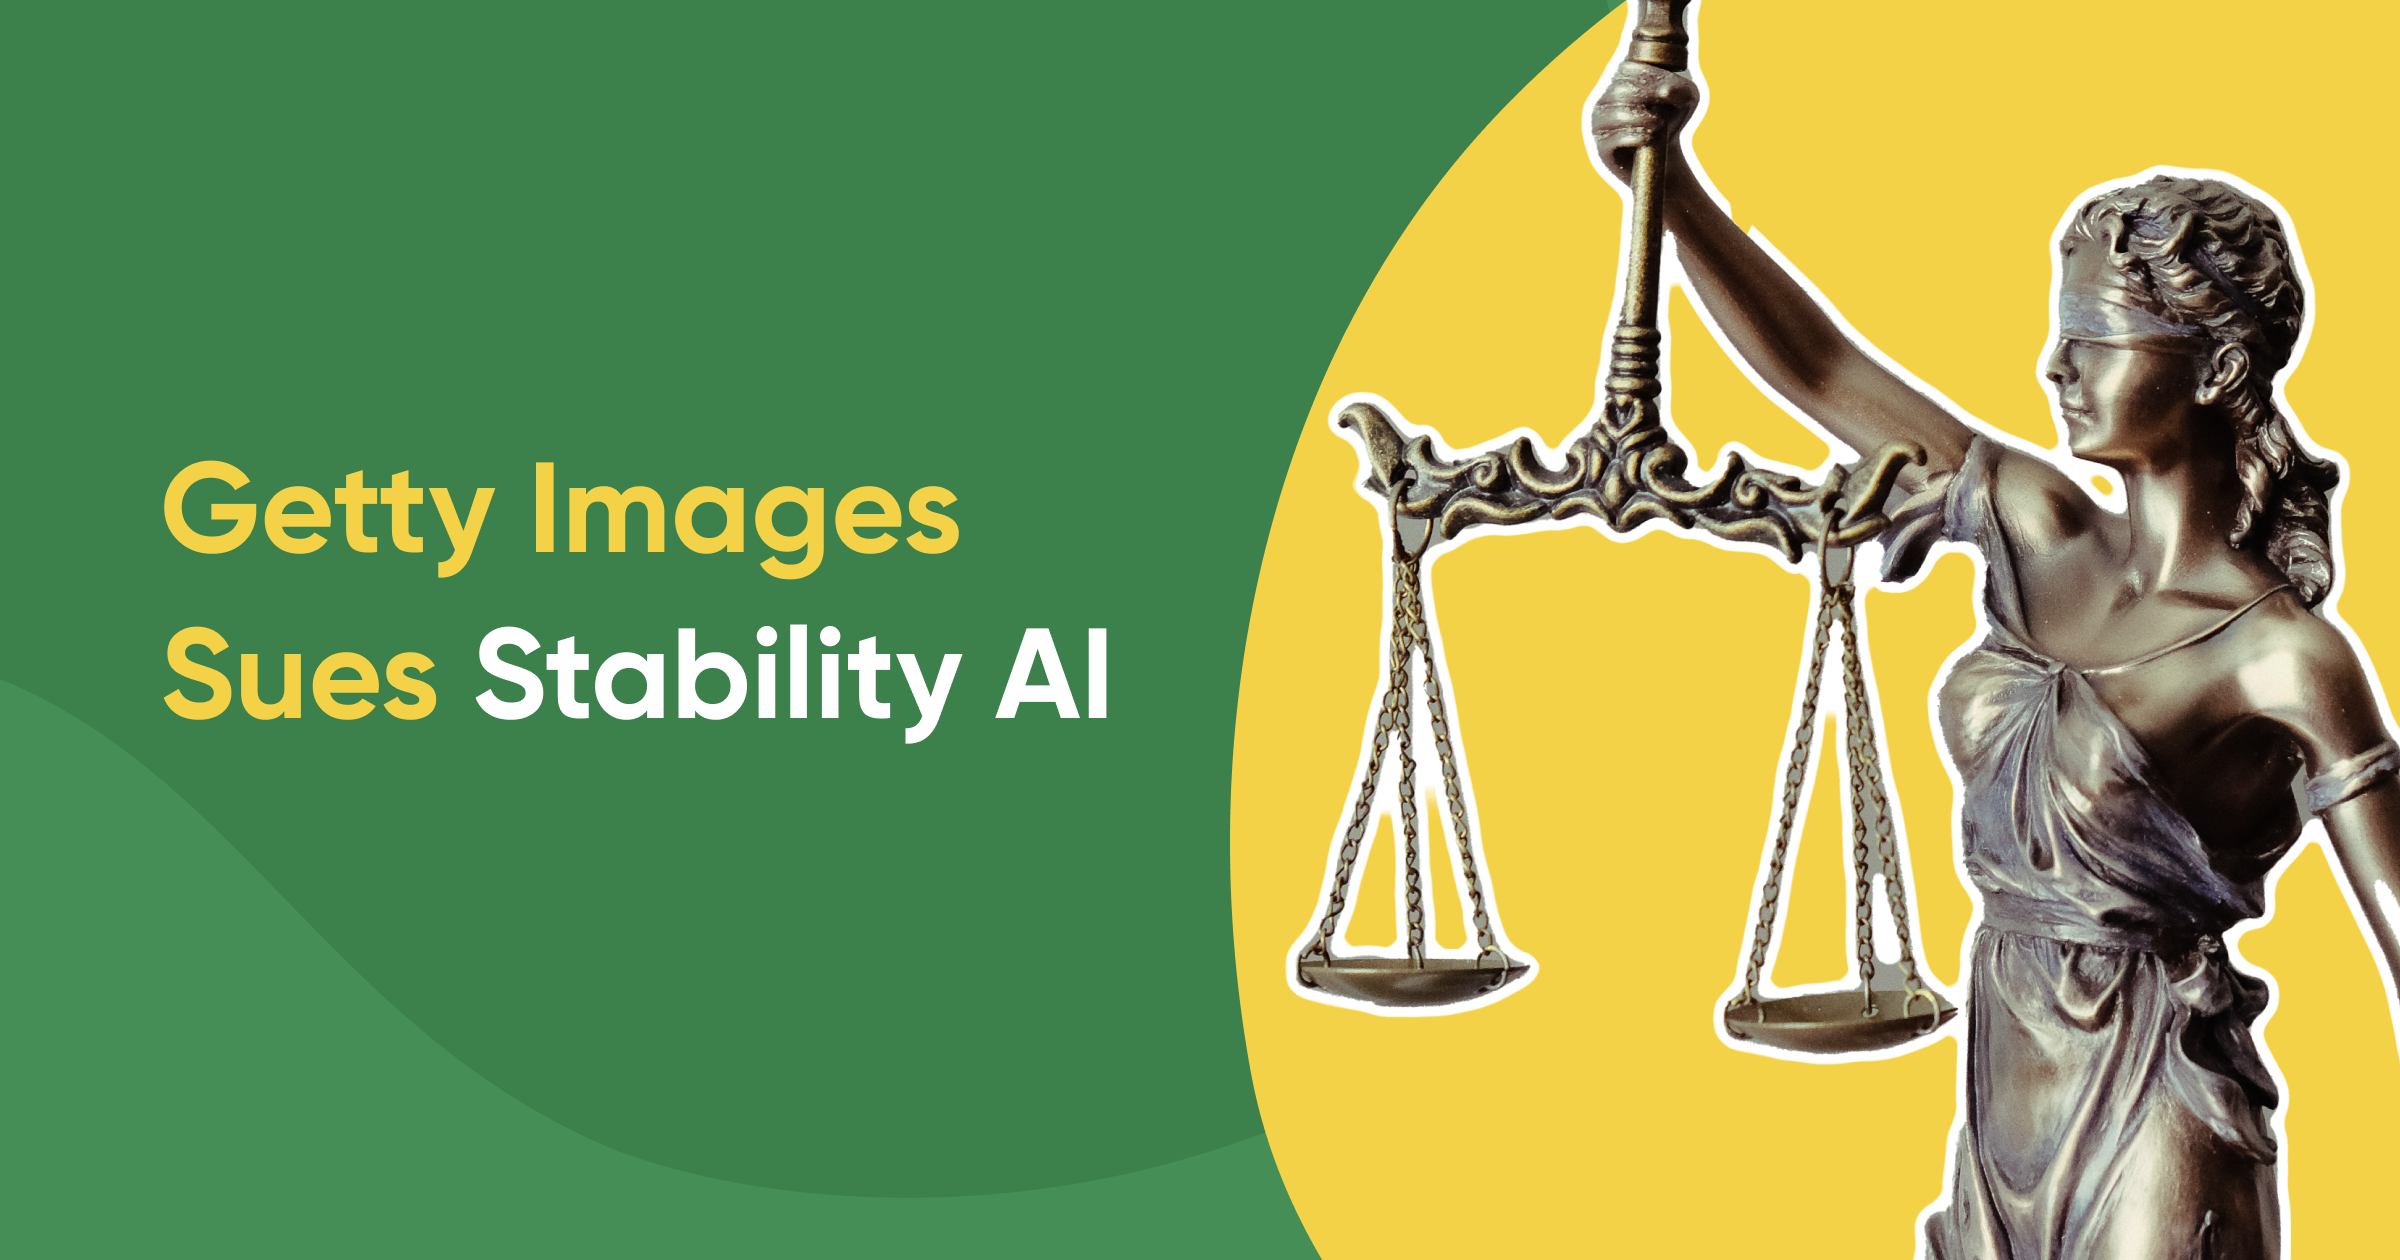 Getty Images sues Stability AI